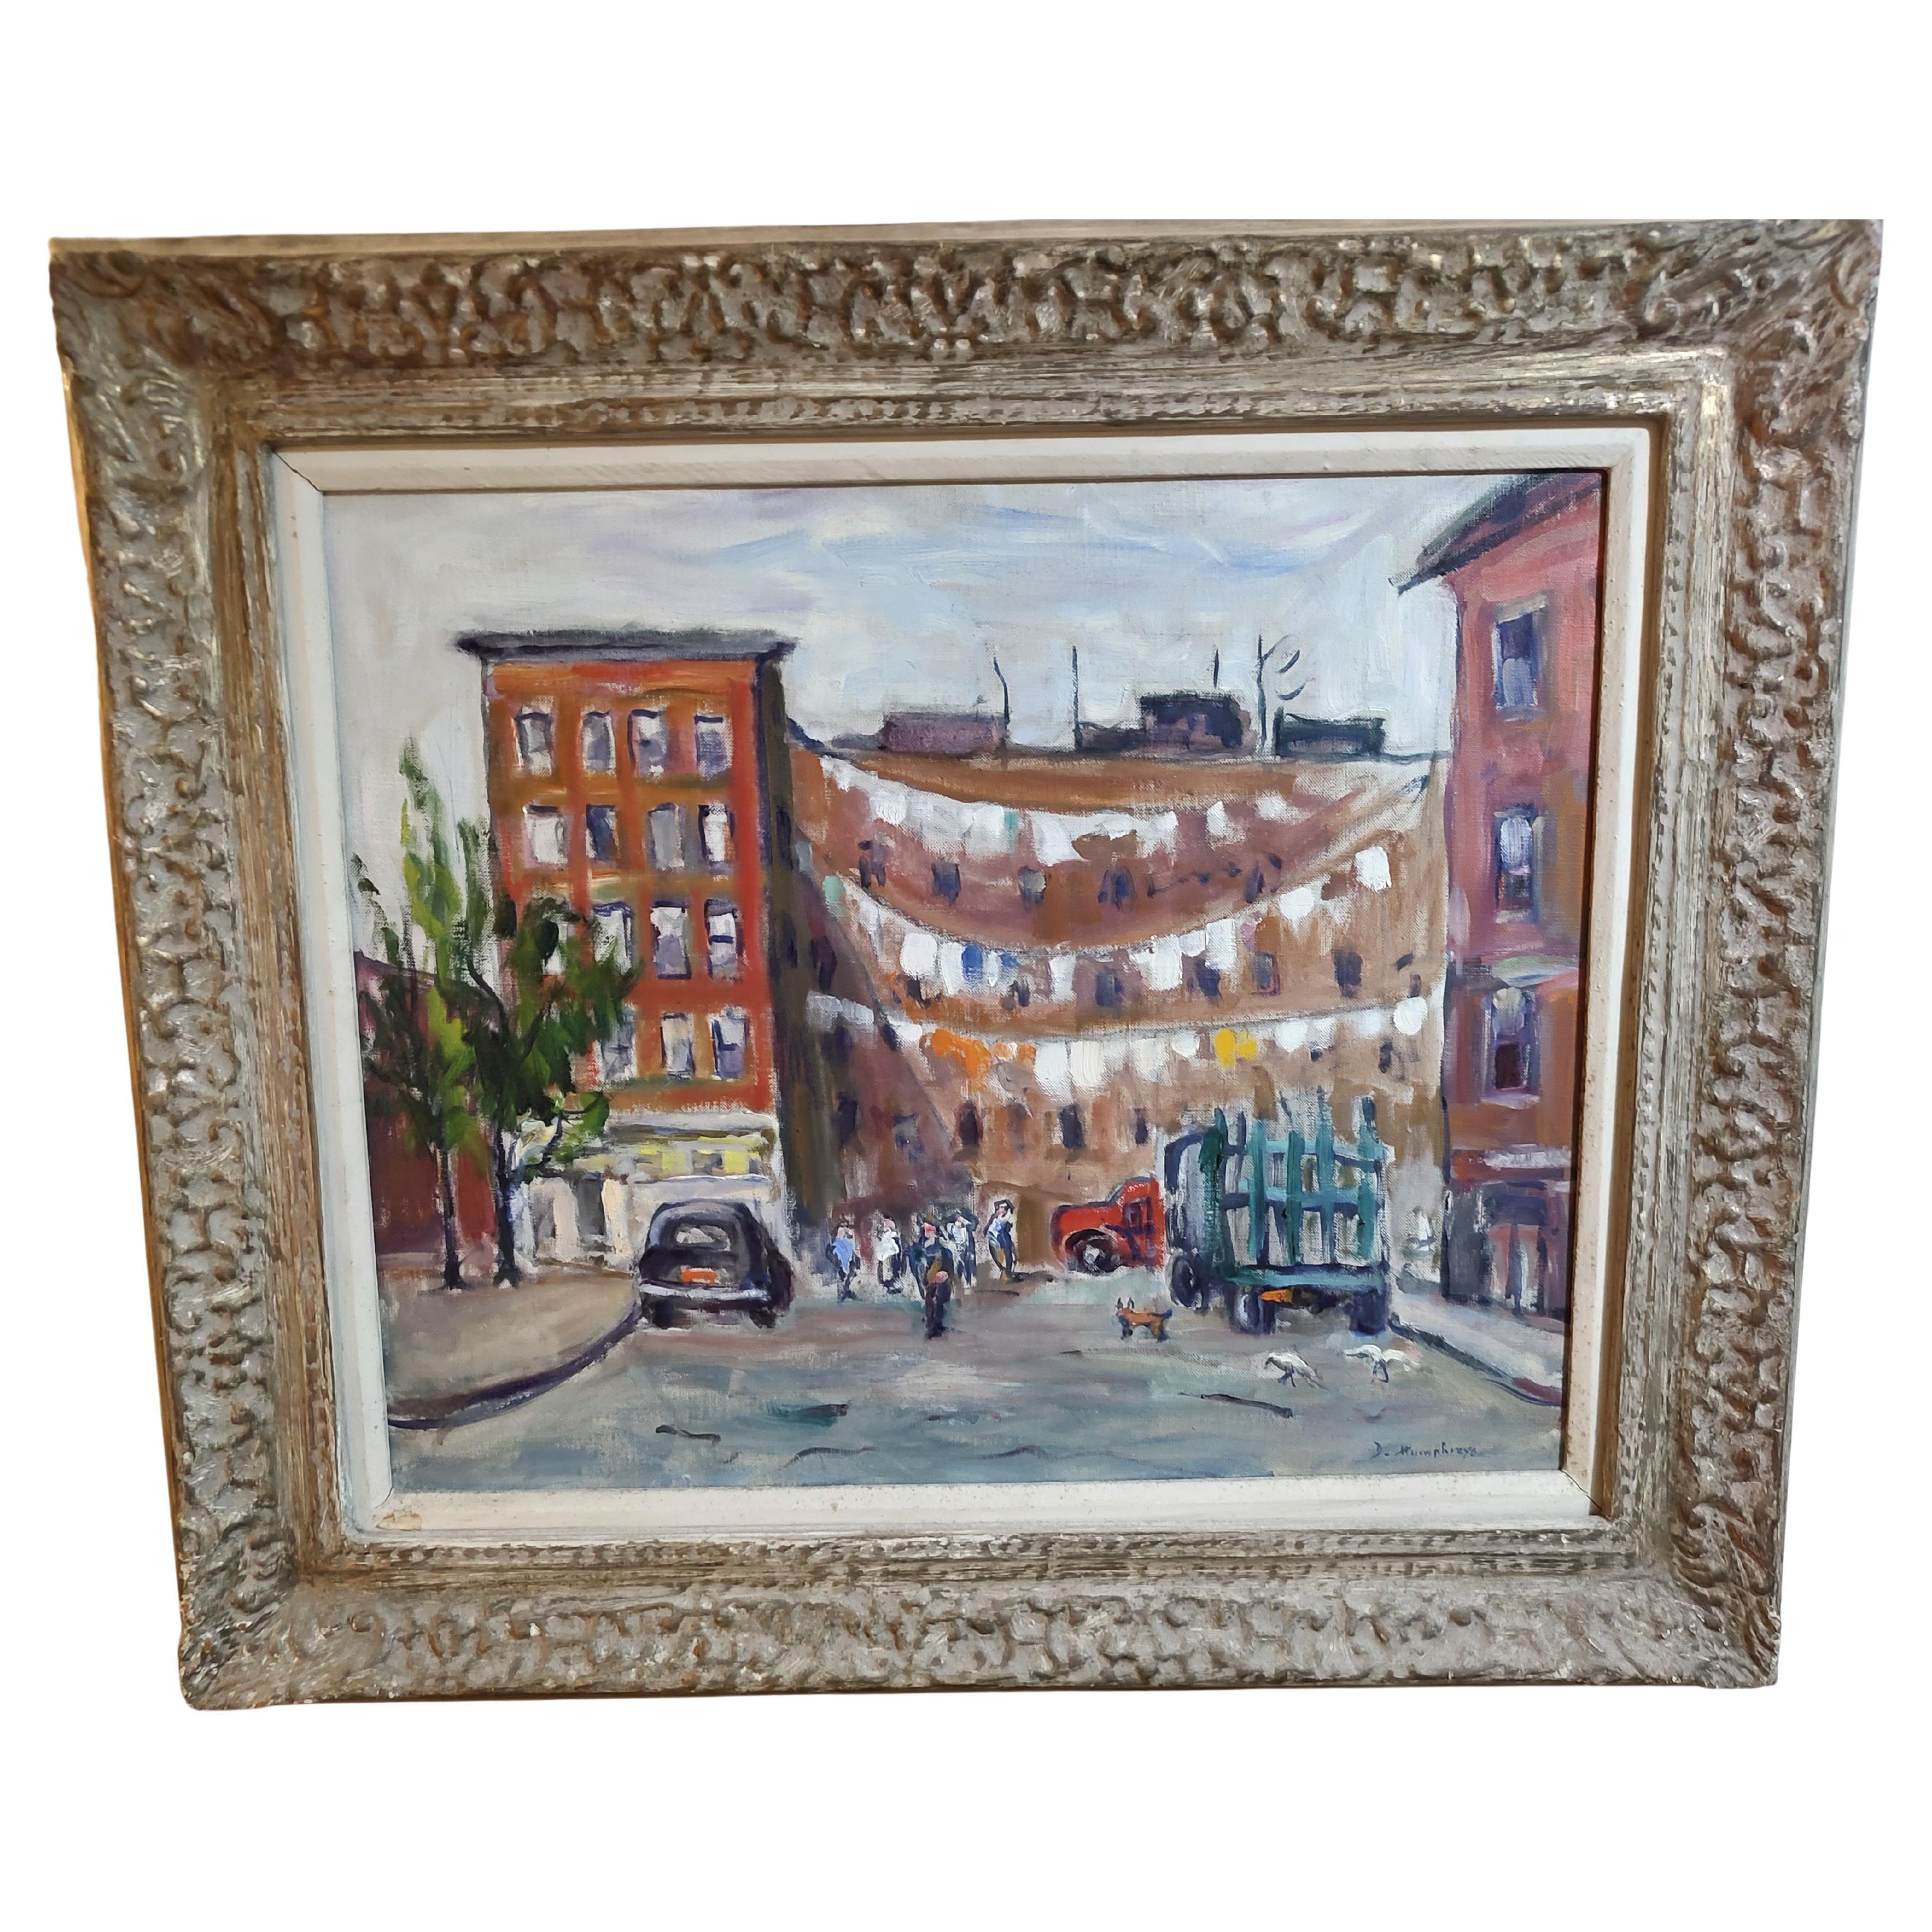 Mid Century Impressionis Painting of a Urban Scene "Laundry Day" by D. Humphreys